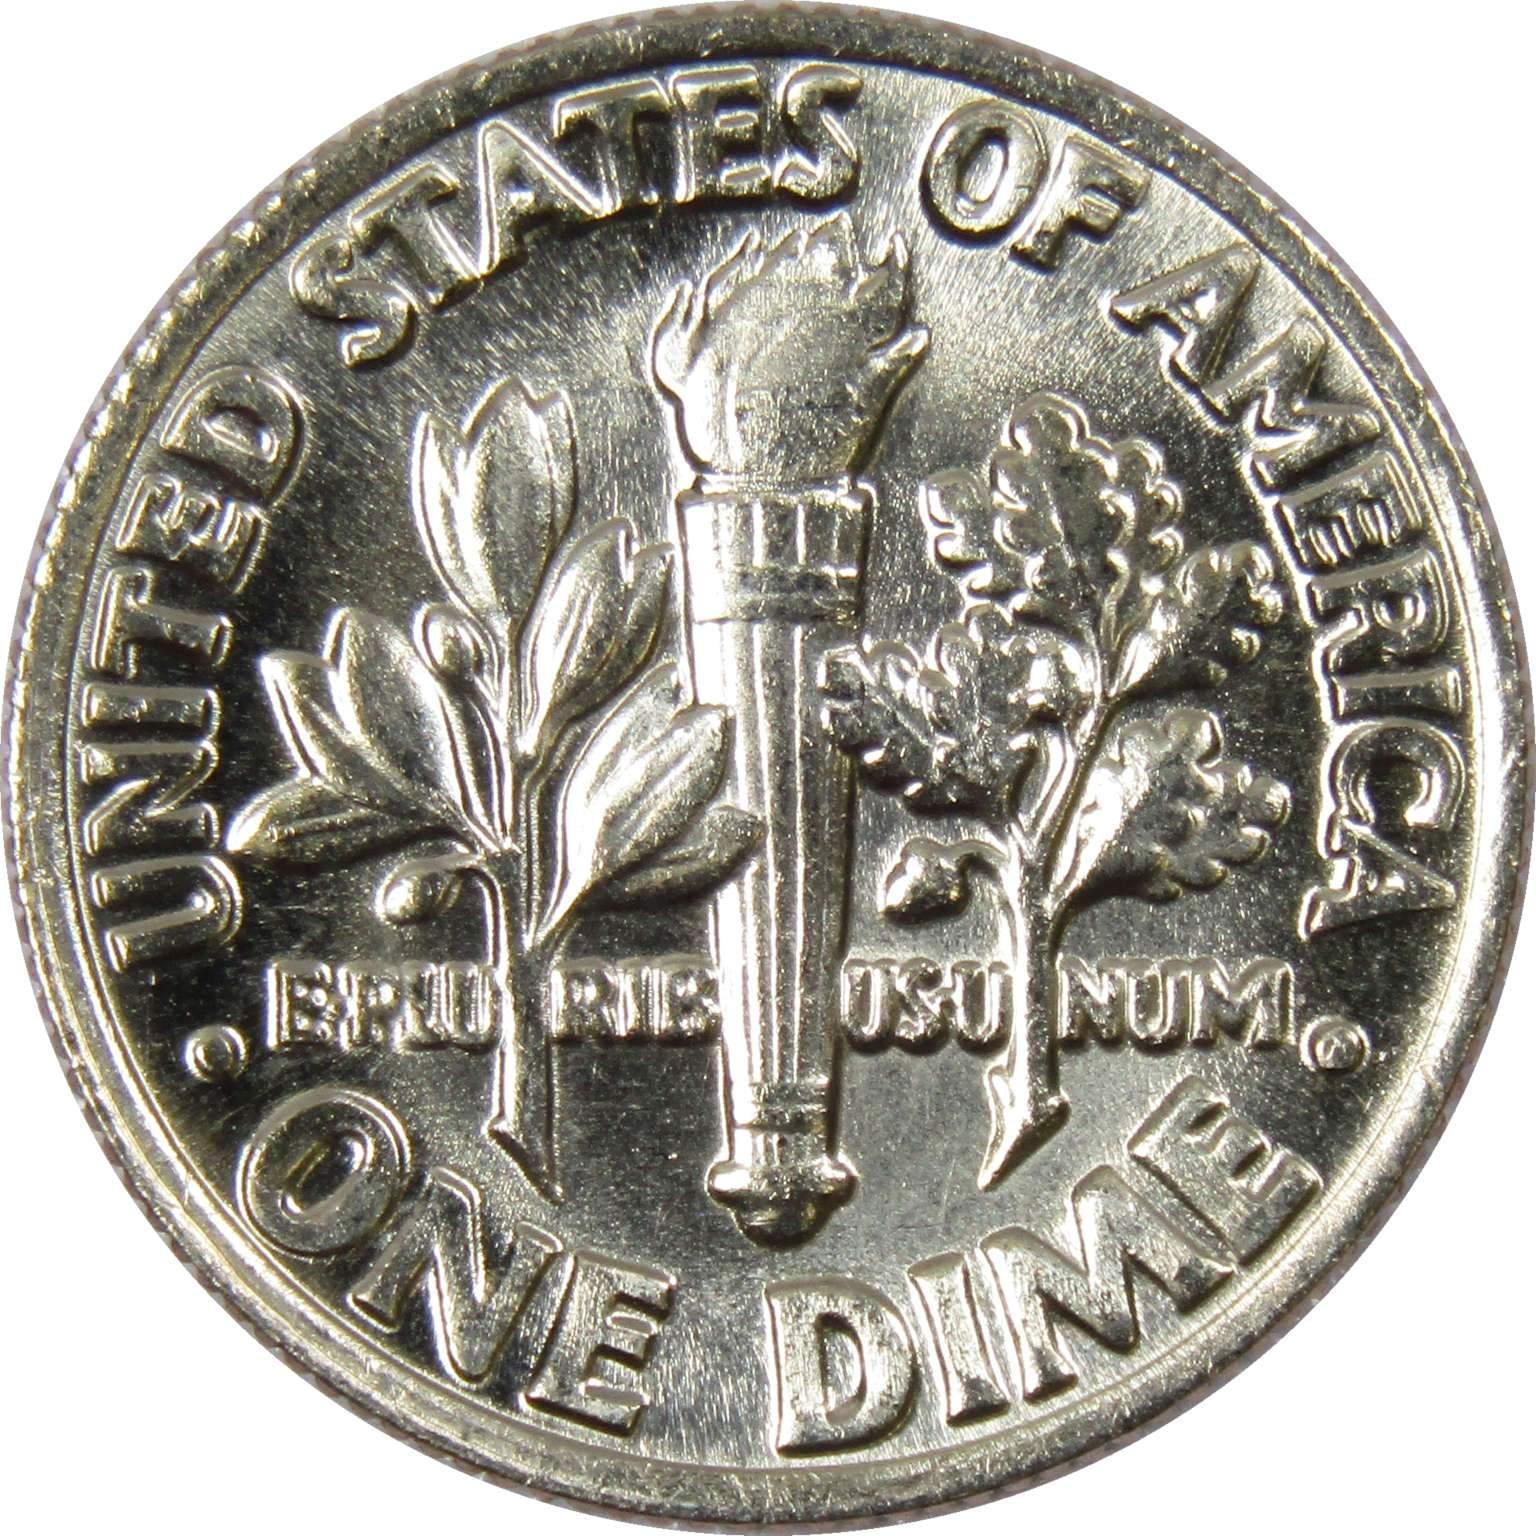 1984 P Roosevelt Dime BU Uncirculated Mint State 10c US Coin Collectible